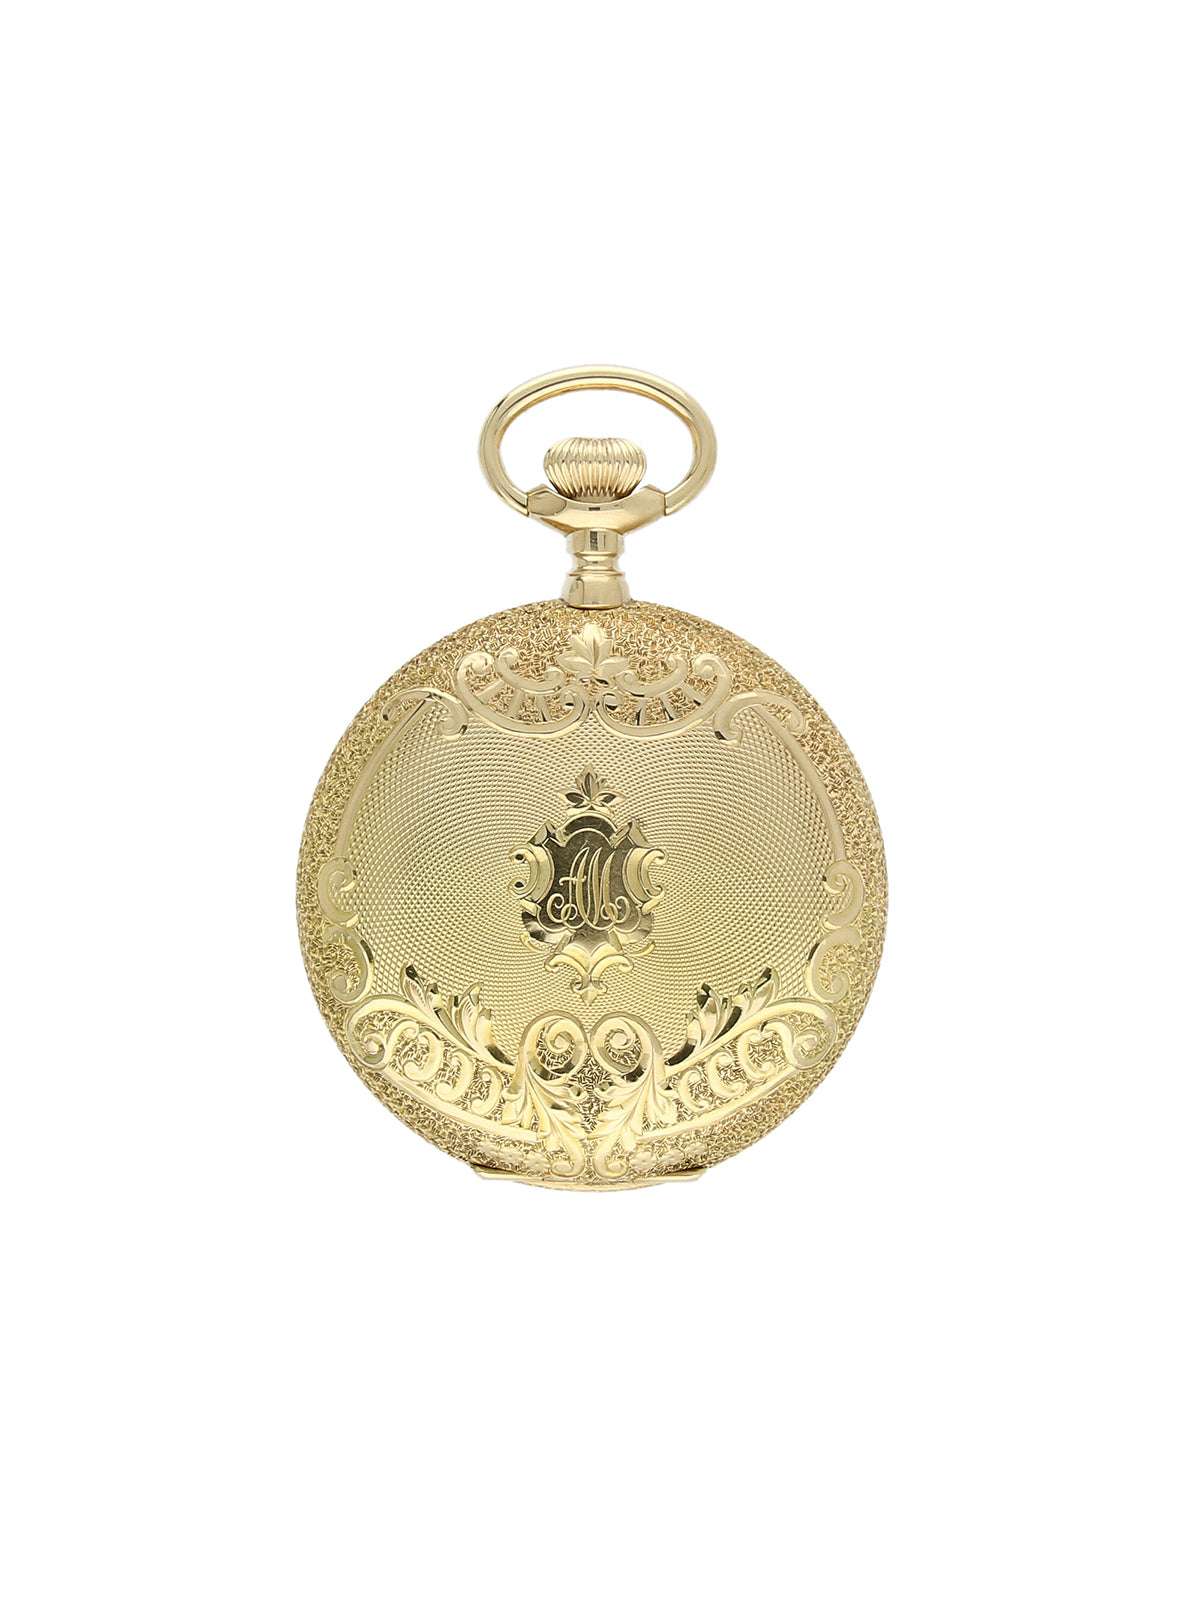 Pre Owned Waltham 17 Jewels Full Hunter 14K Yellow Gold Stamped Manual Wind Pocket Watch